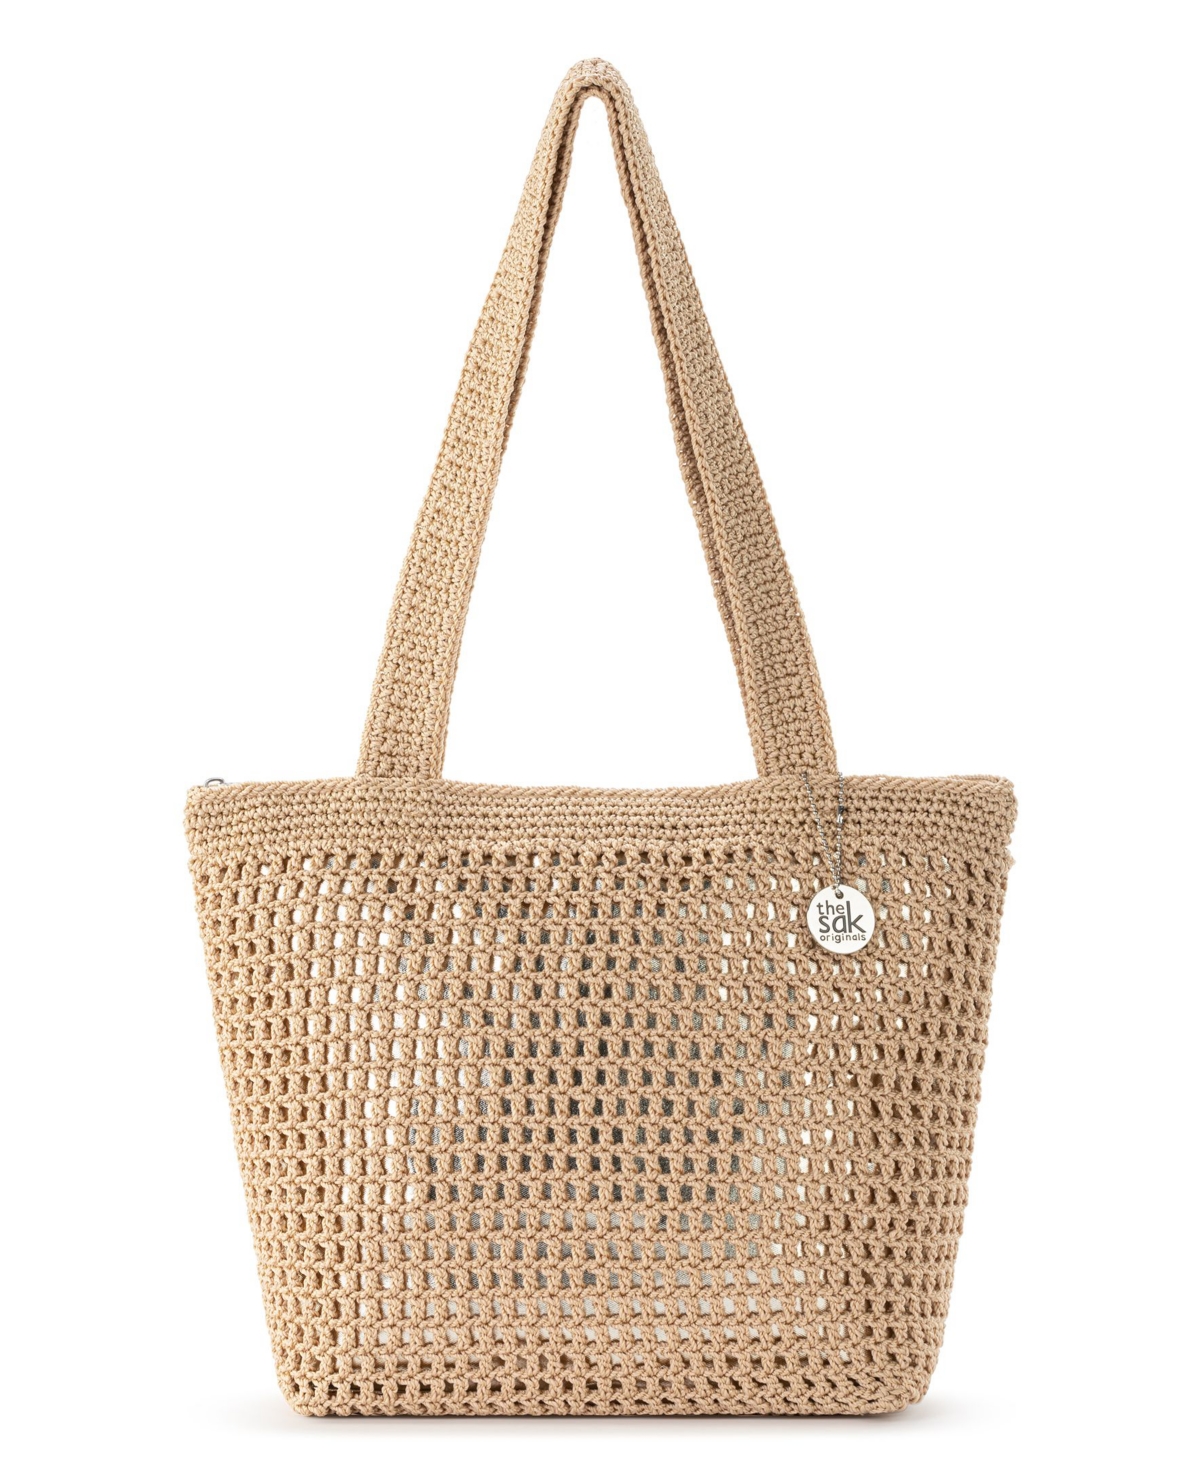 The Sak Women's Casual Classics Crochet Tote In Bamboo With Gold